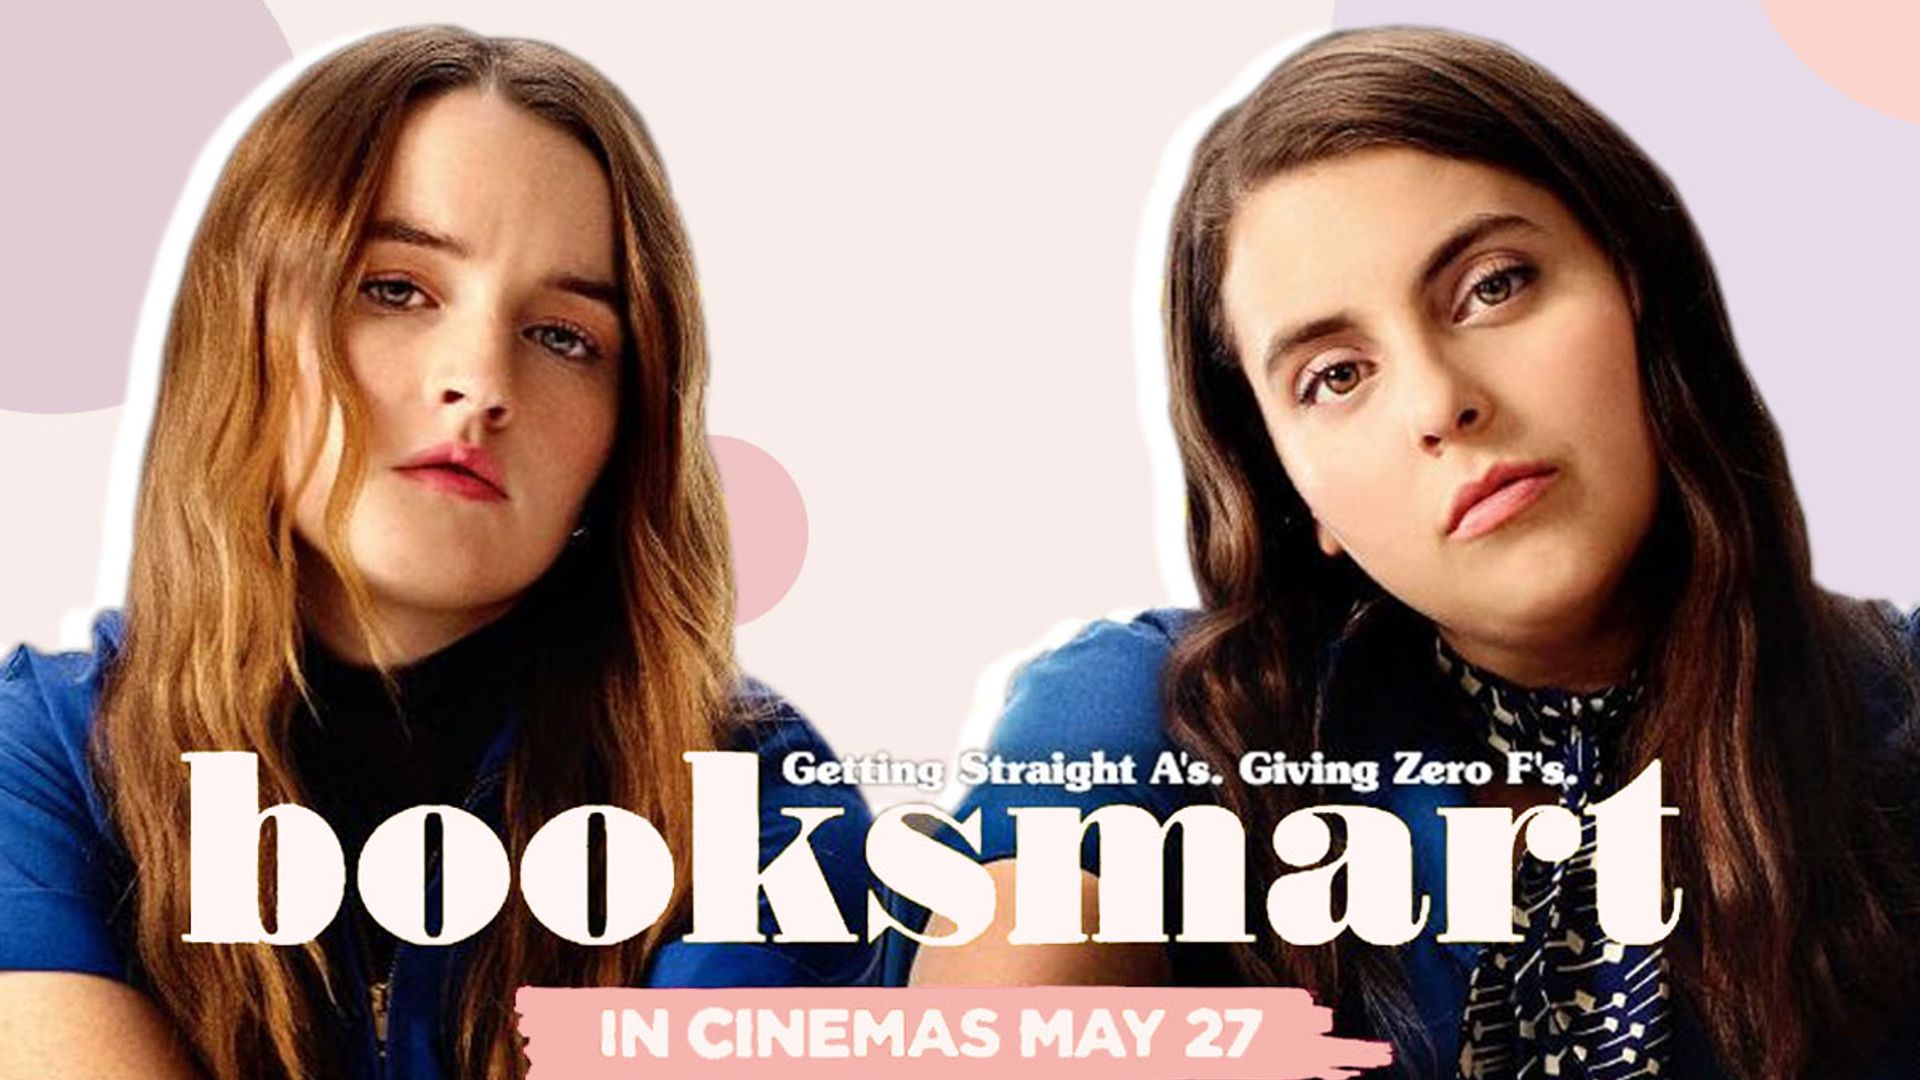 Why everyone should go and see Booksmart